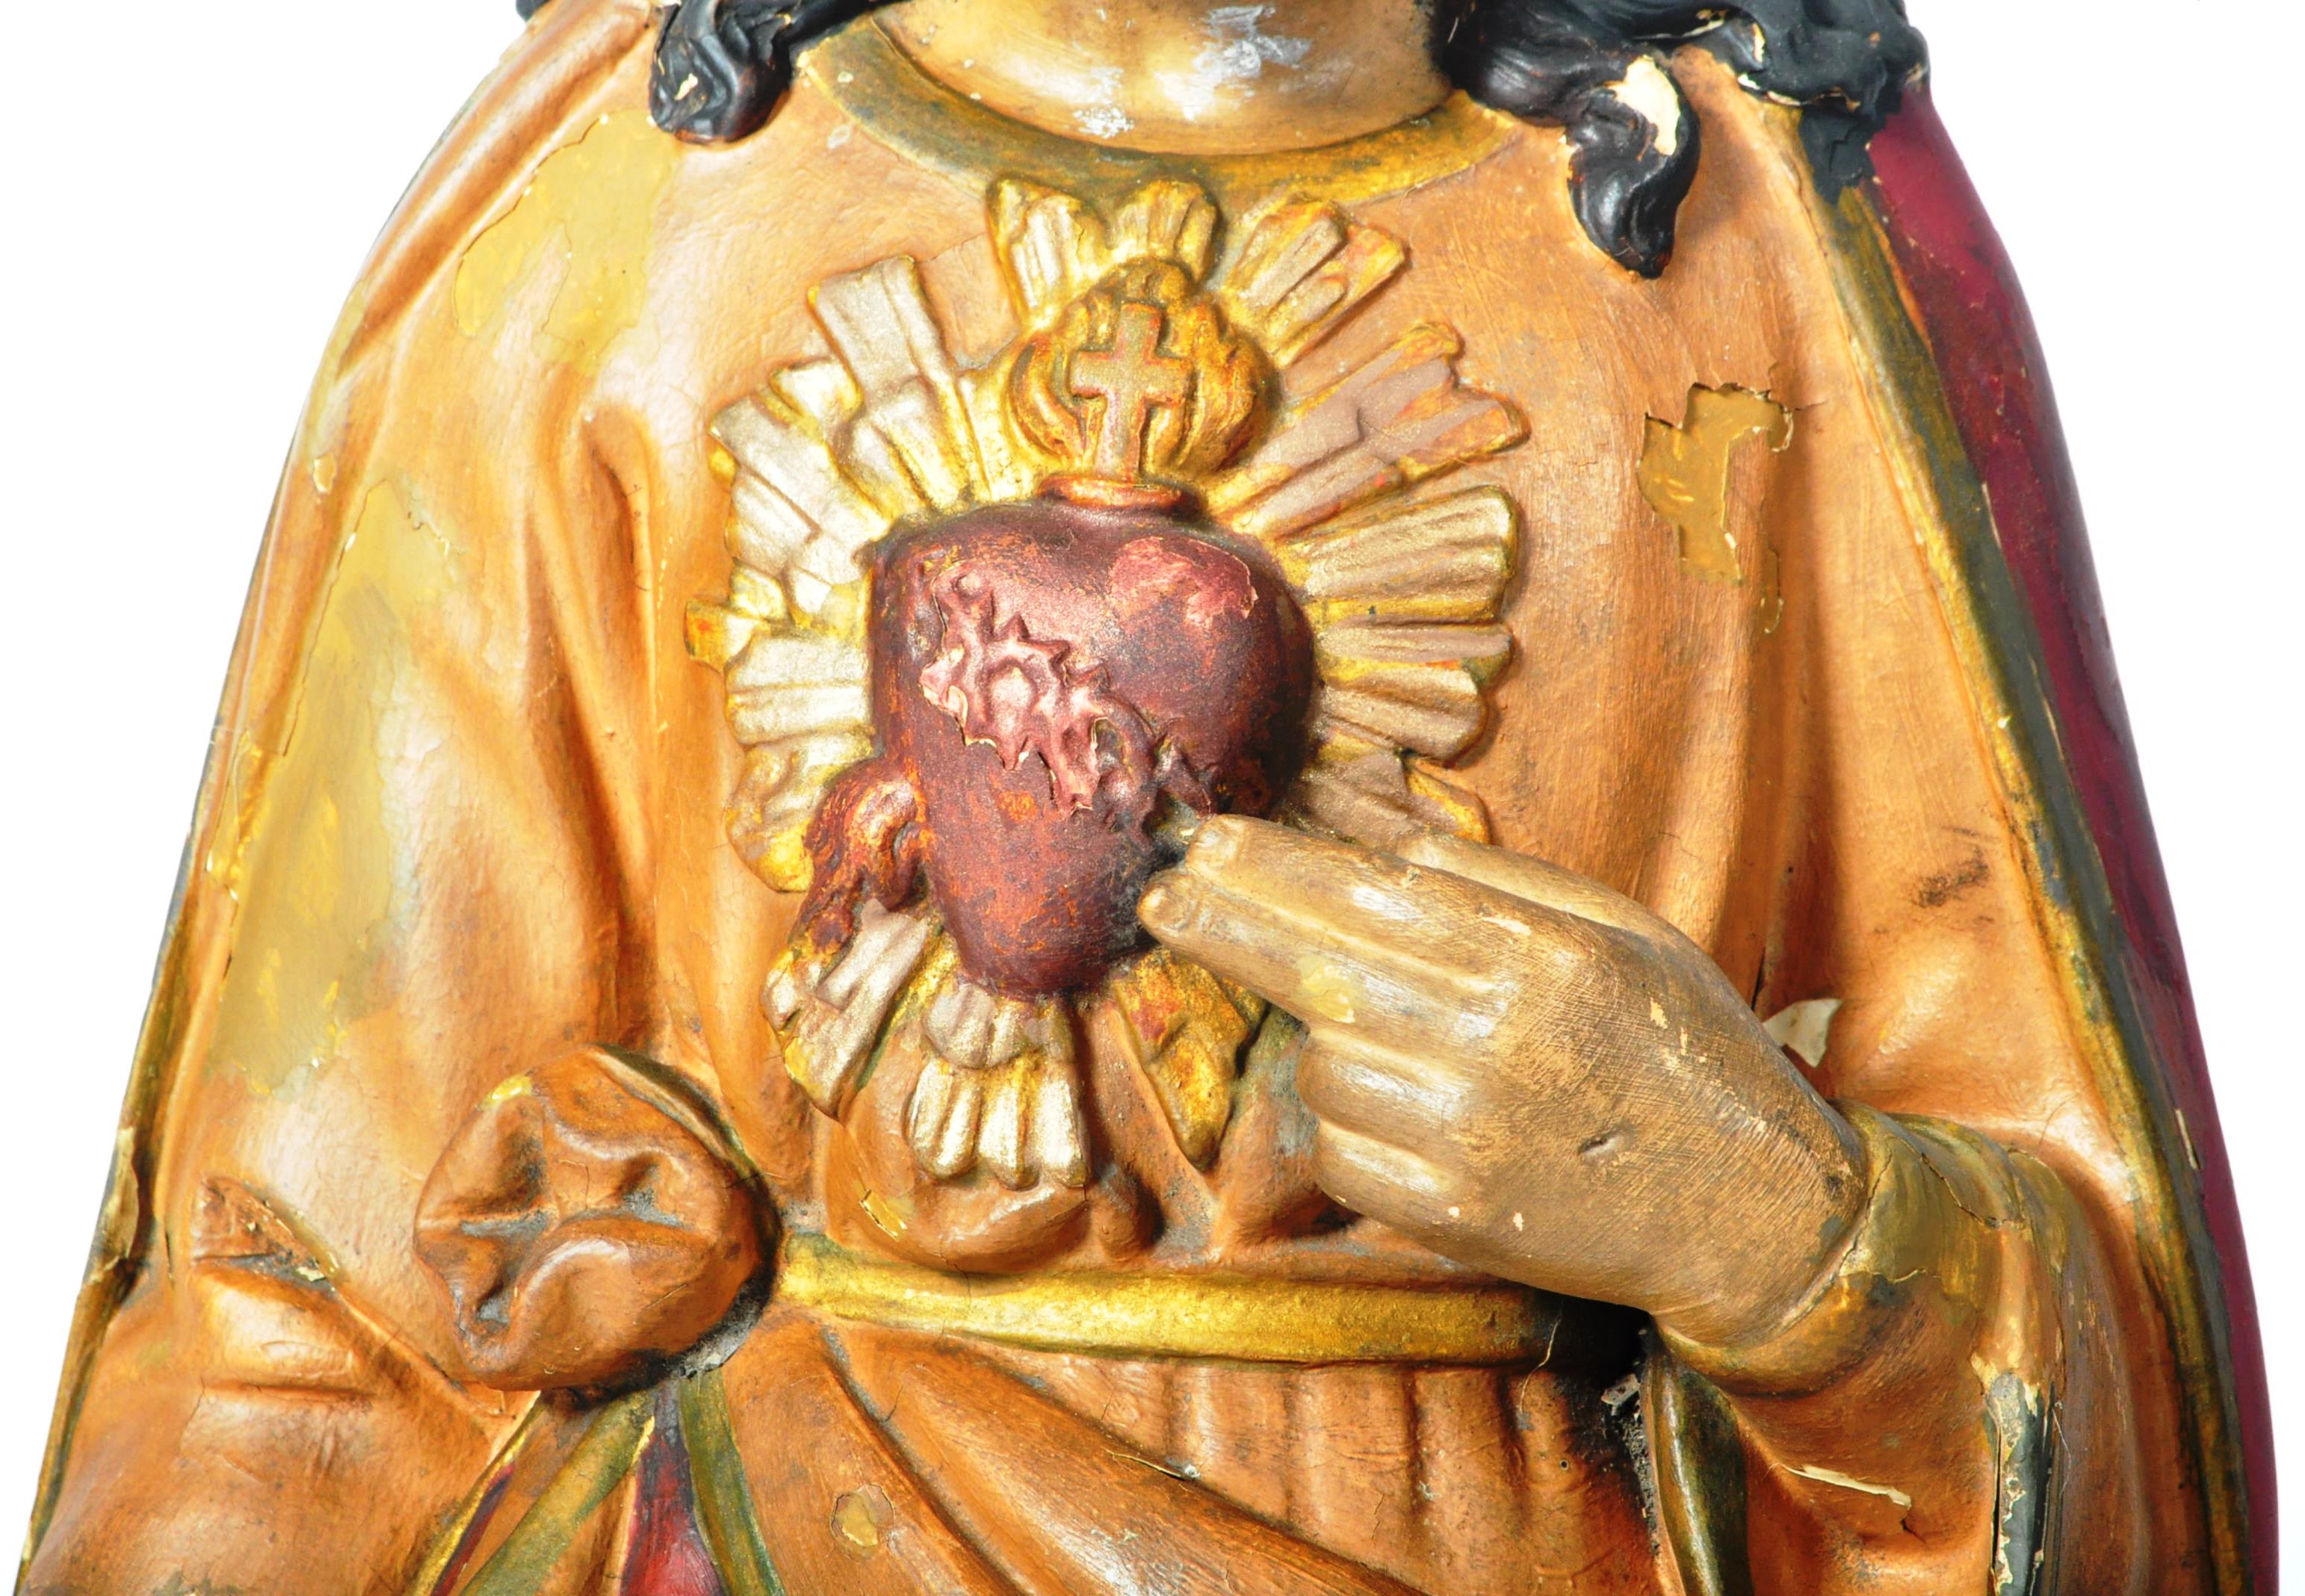 LARGE 19TH CENTURY CARVED SACRED HEART CHRIST STATUE - Image 4 of 10